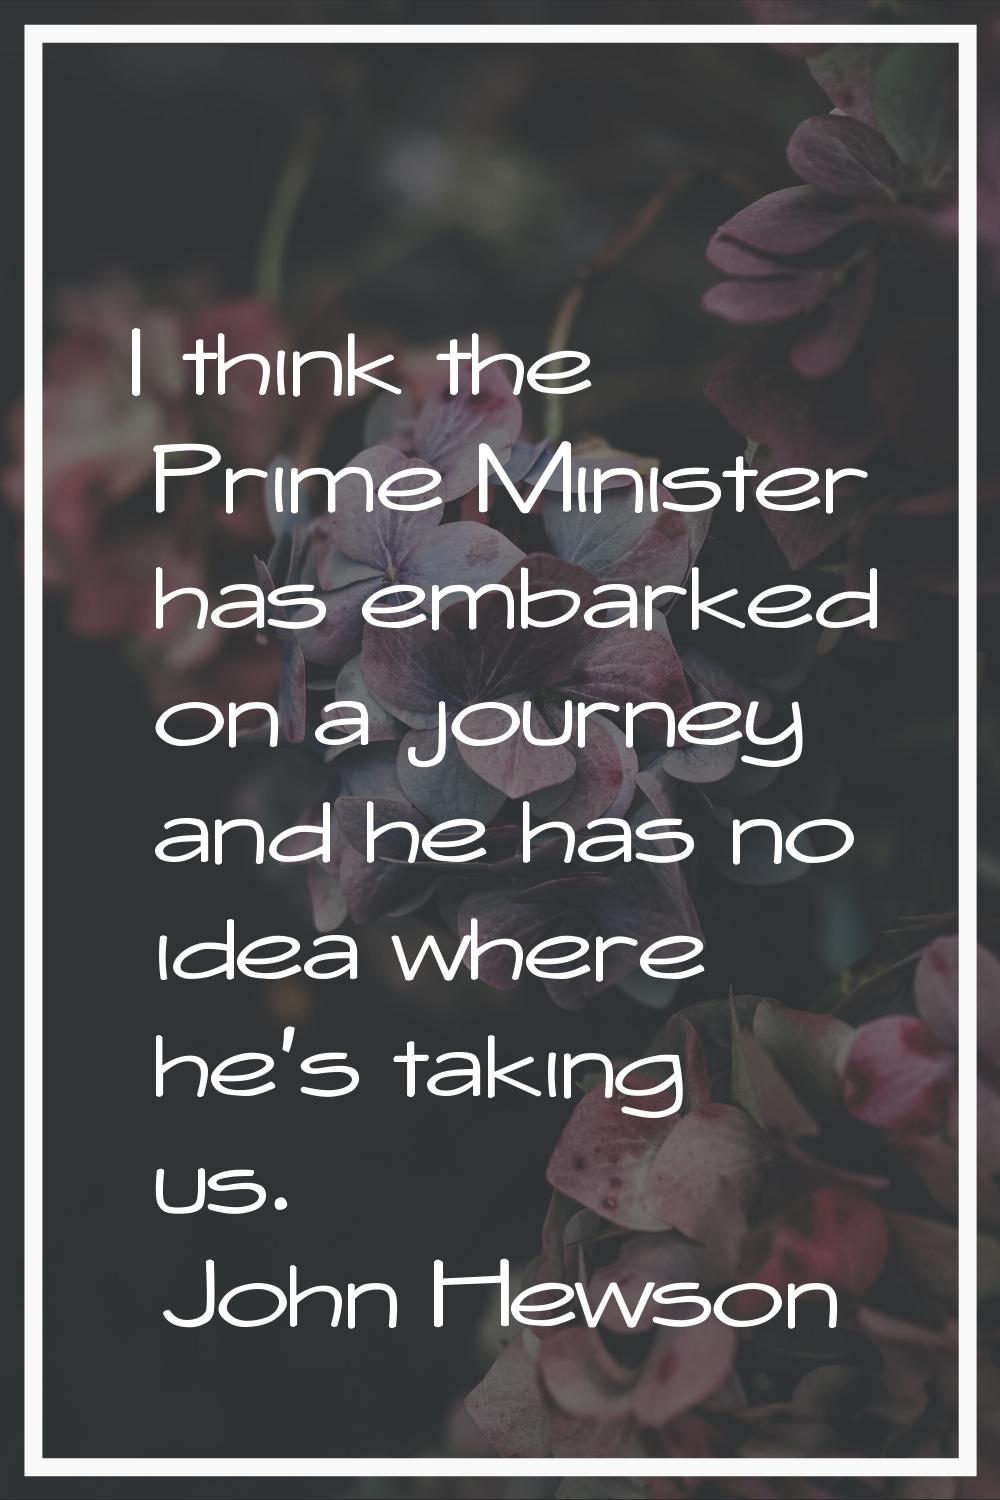 I think the Prime Minister has embarked on a journey and he has no idea where he's taking us.